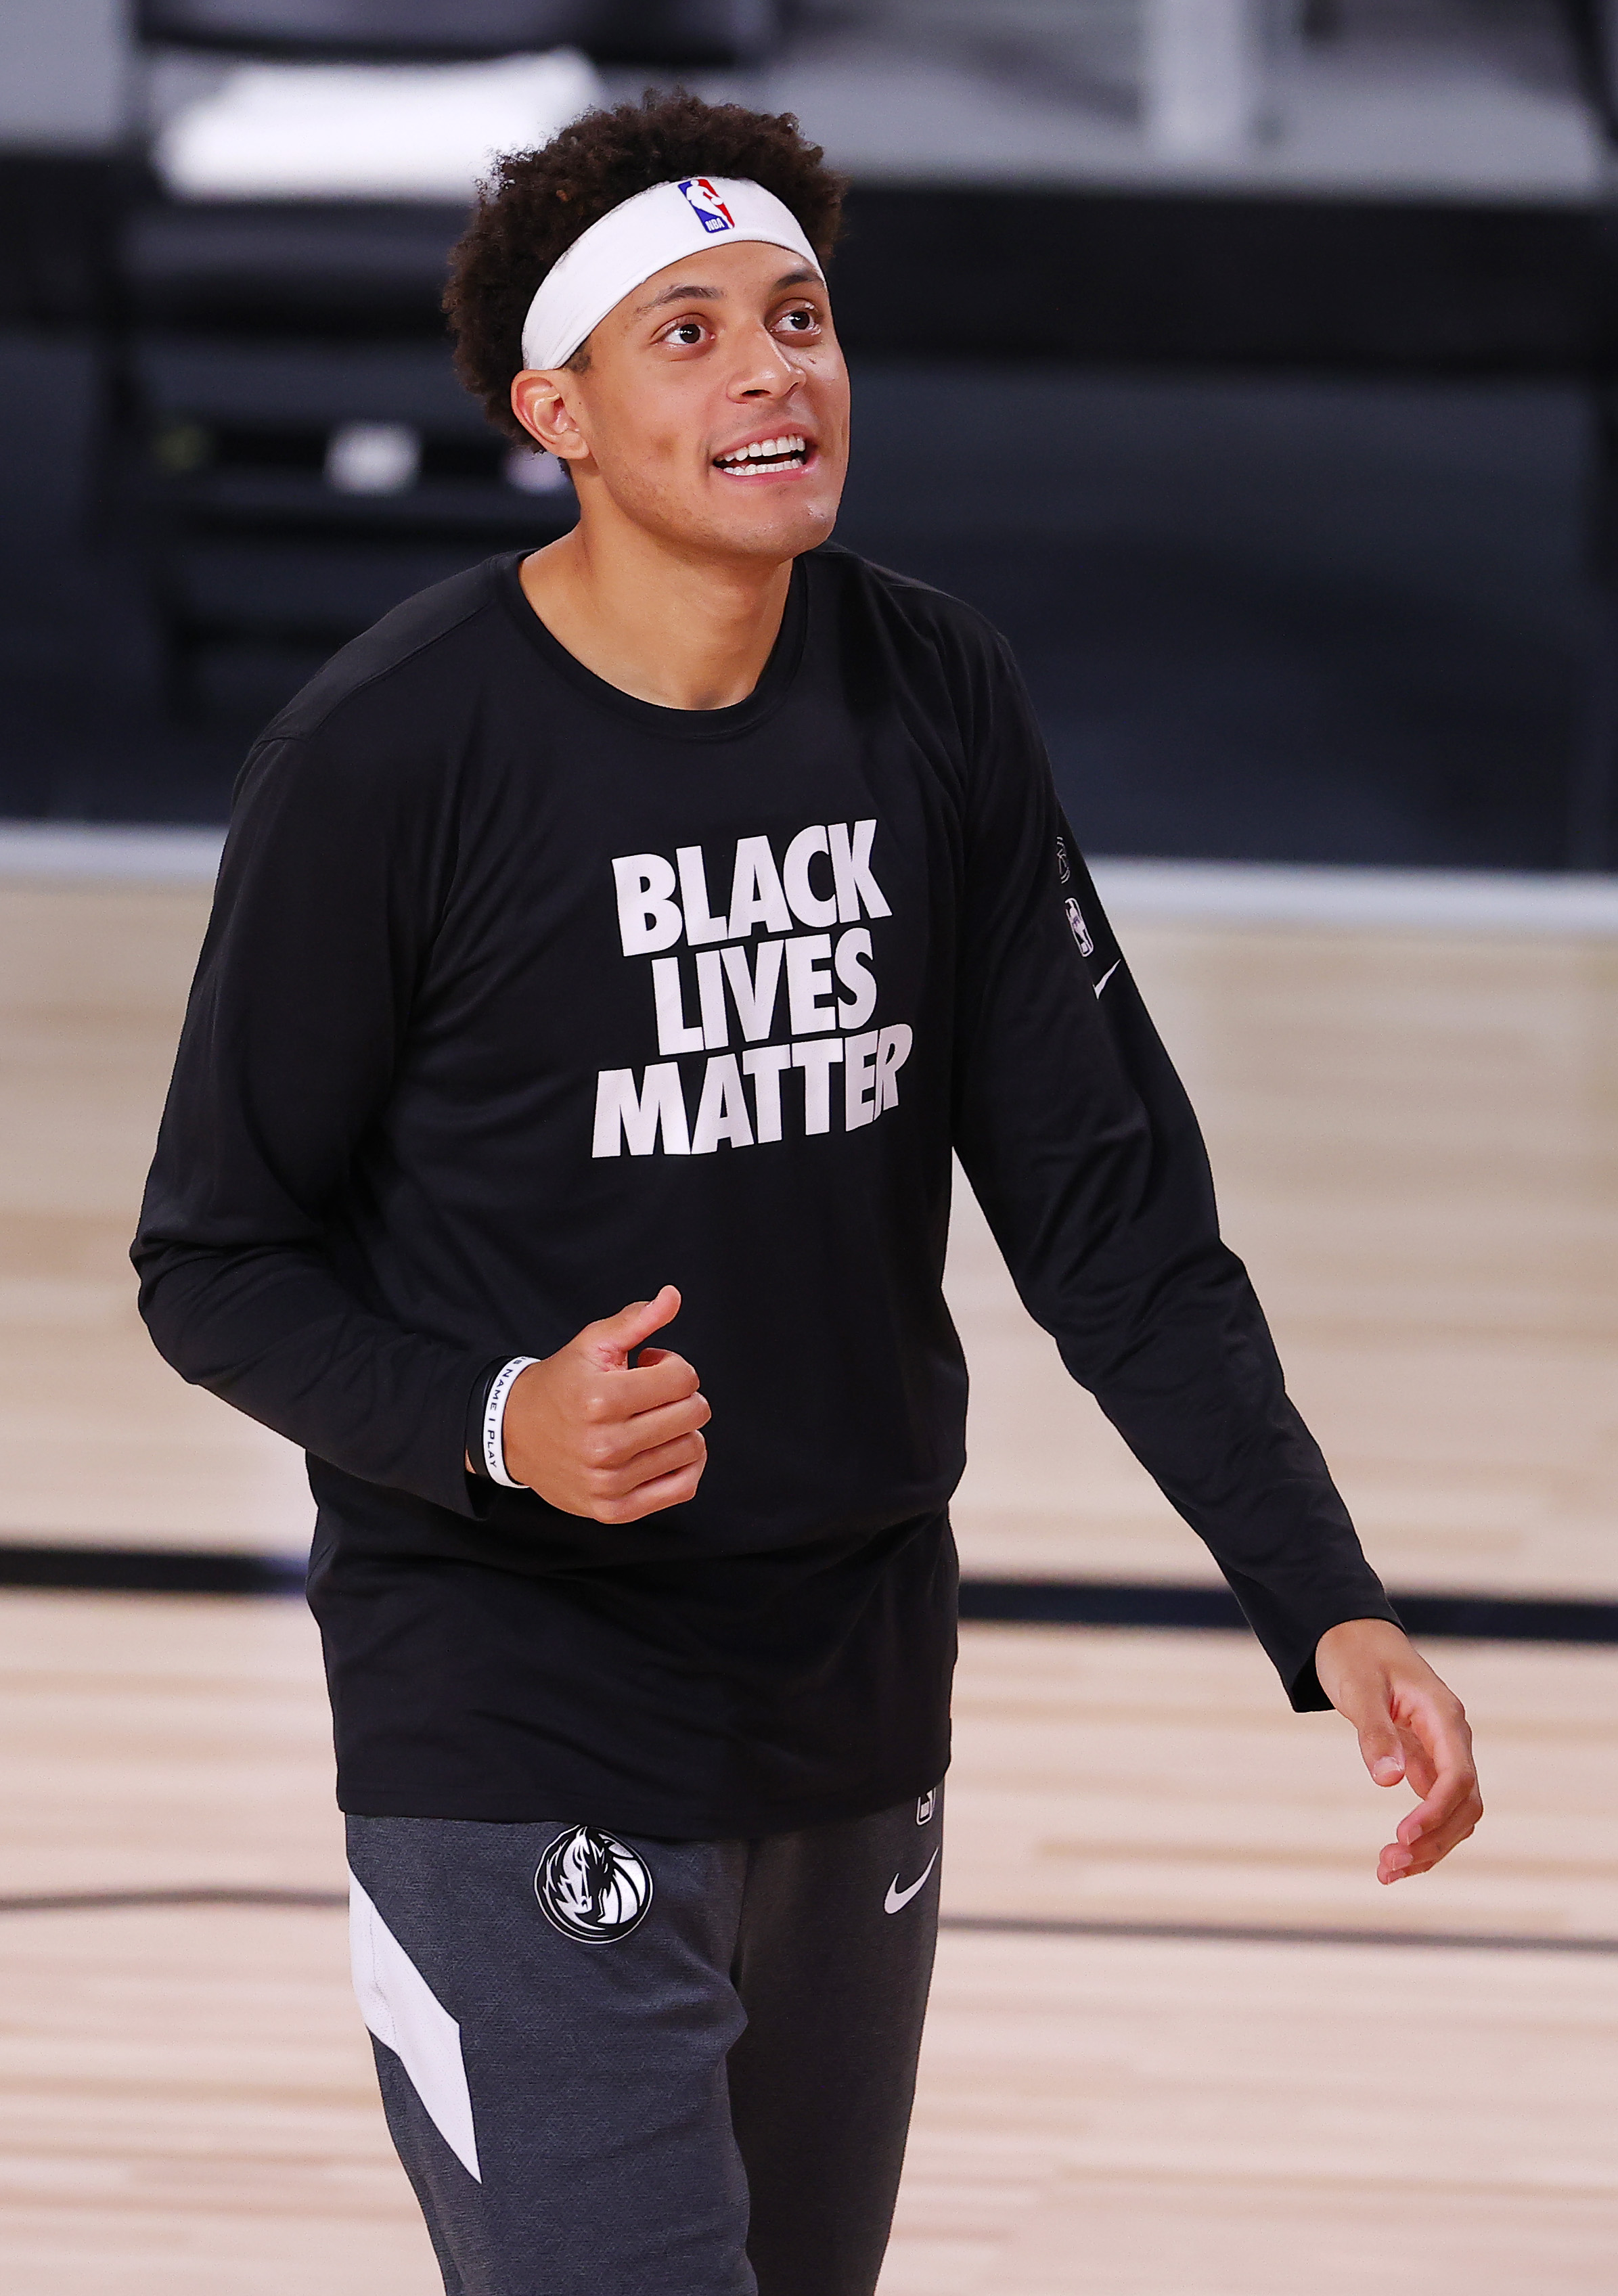 A special highlight for two lucky HBCU students will be their LIVE interview of NBA player Justin Jackson (Dallas Mavericks) who is doing his part by discussing voting from an athlete’s perspective